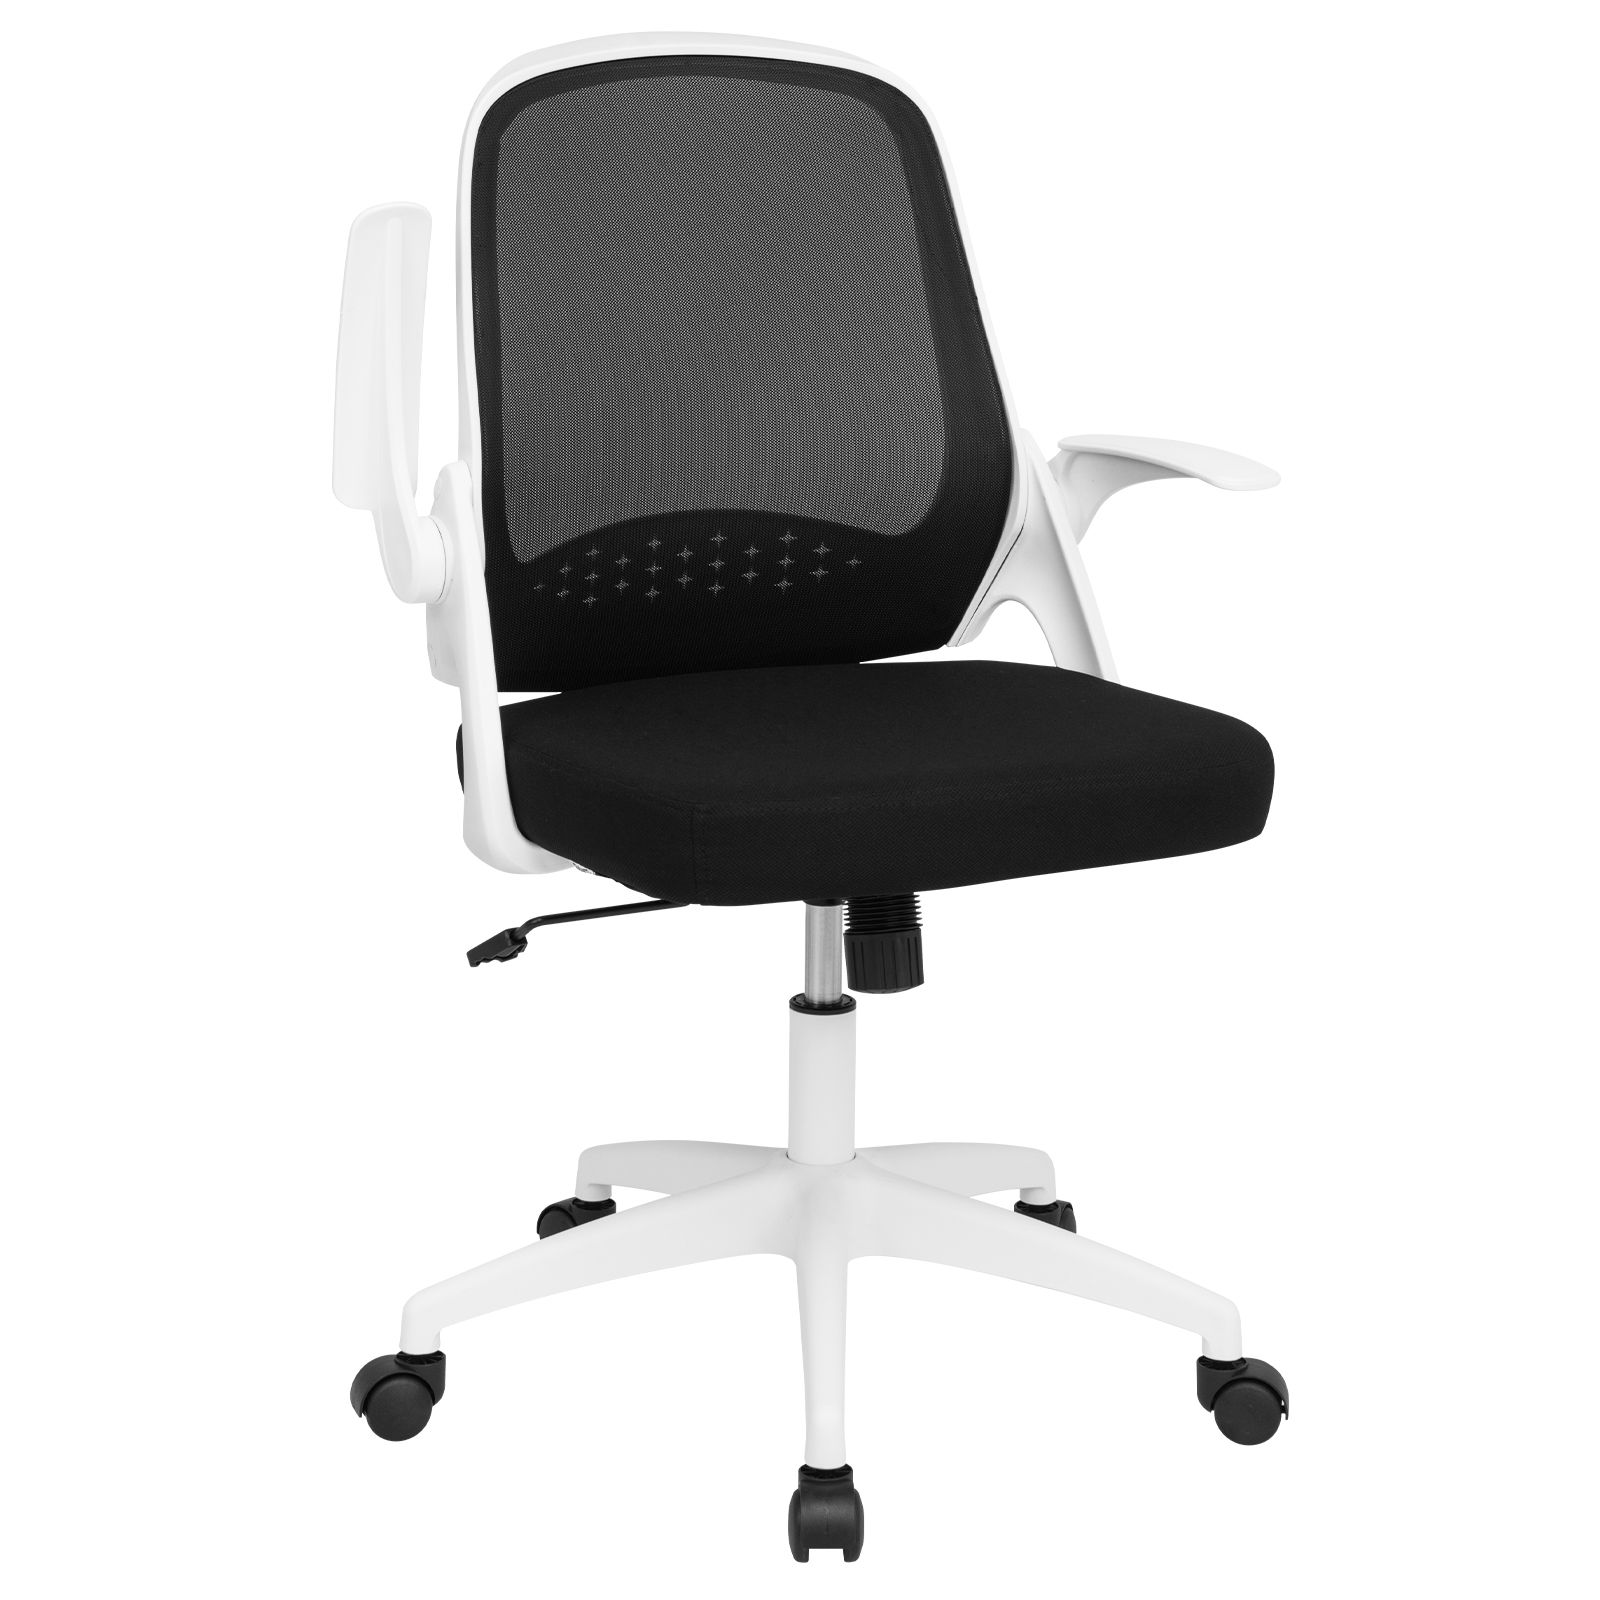 Height Adjust Swivel Rolling Mesh Office Chair with Ergonomic Mid-Back White